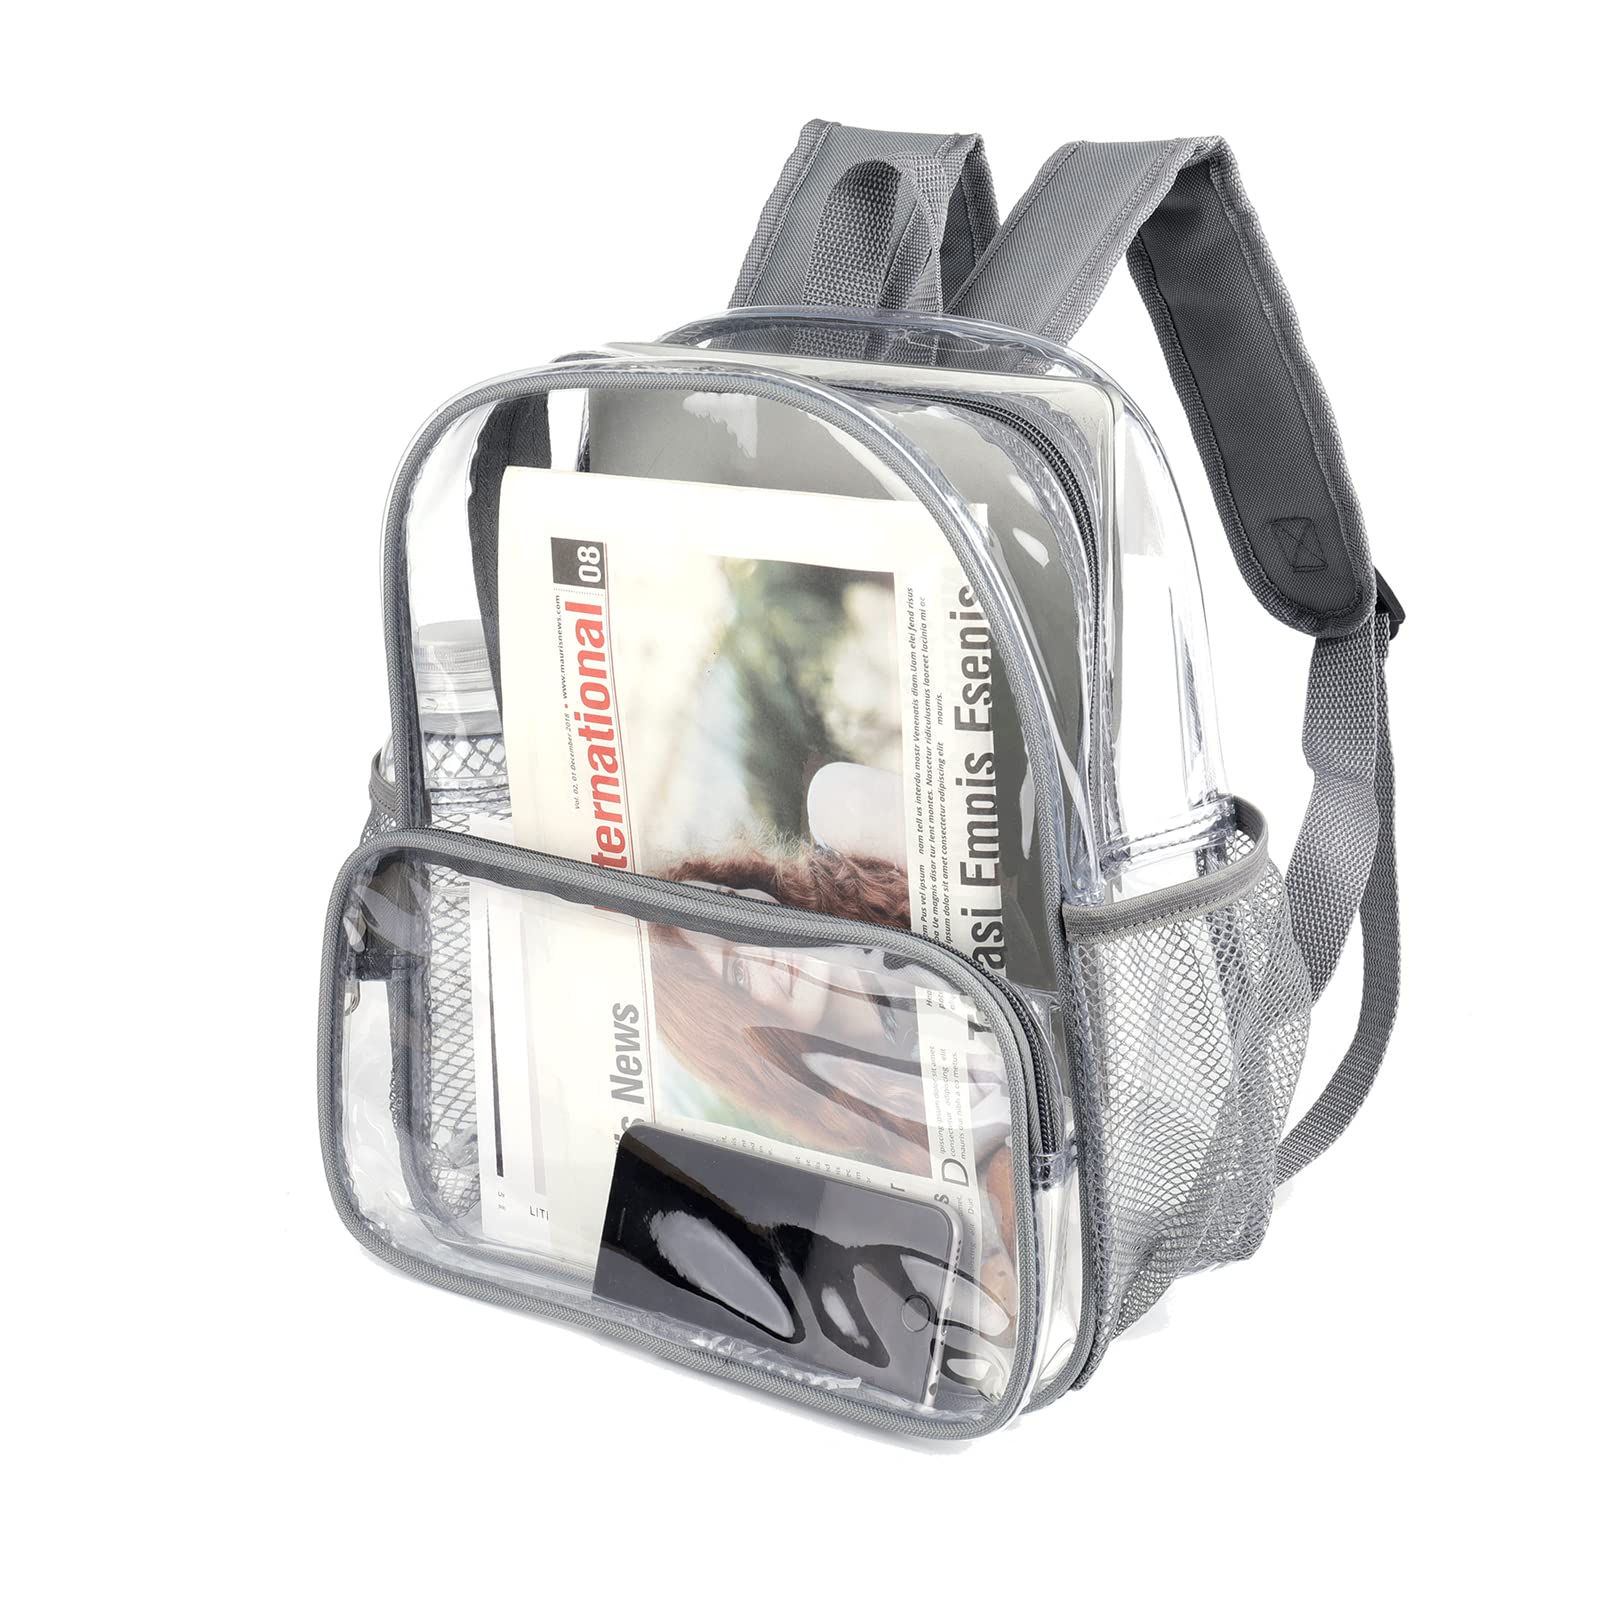 Stadium Approved Clear Mini Backpack 12x6x12 Small Clear Backpack See Through Transparent Stadium Backpacks